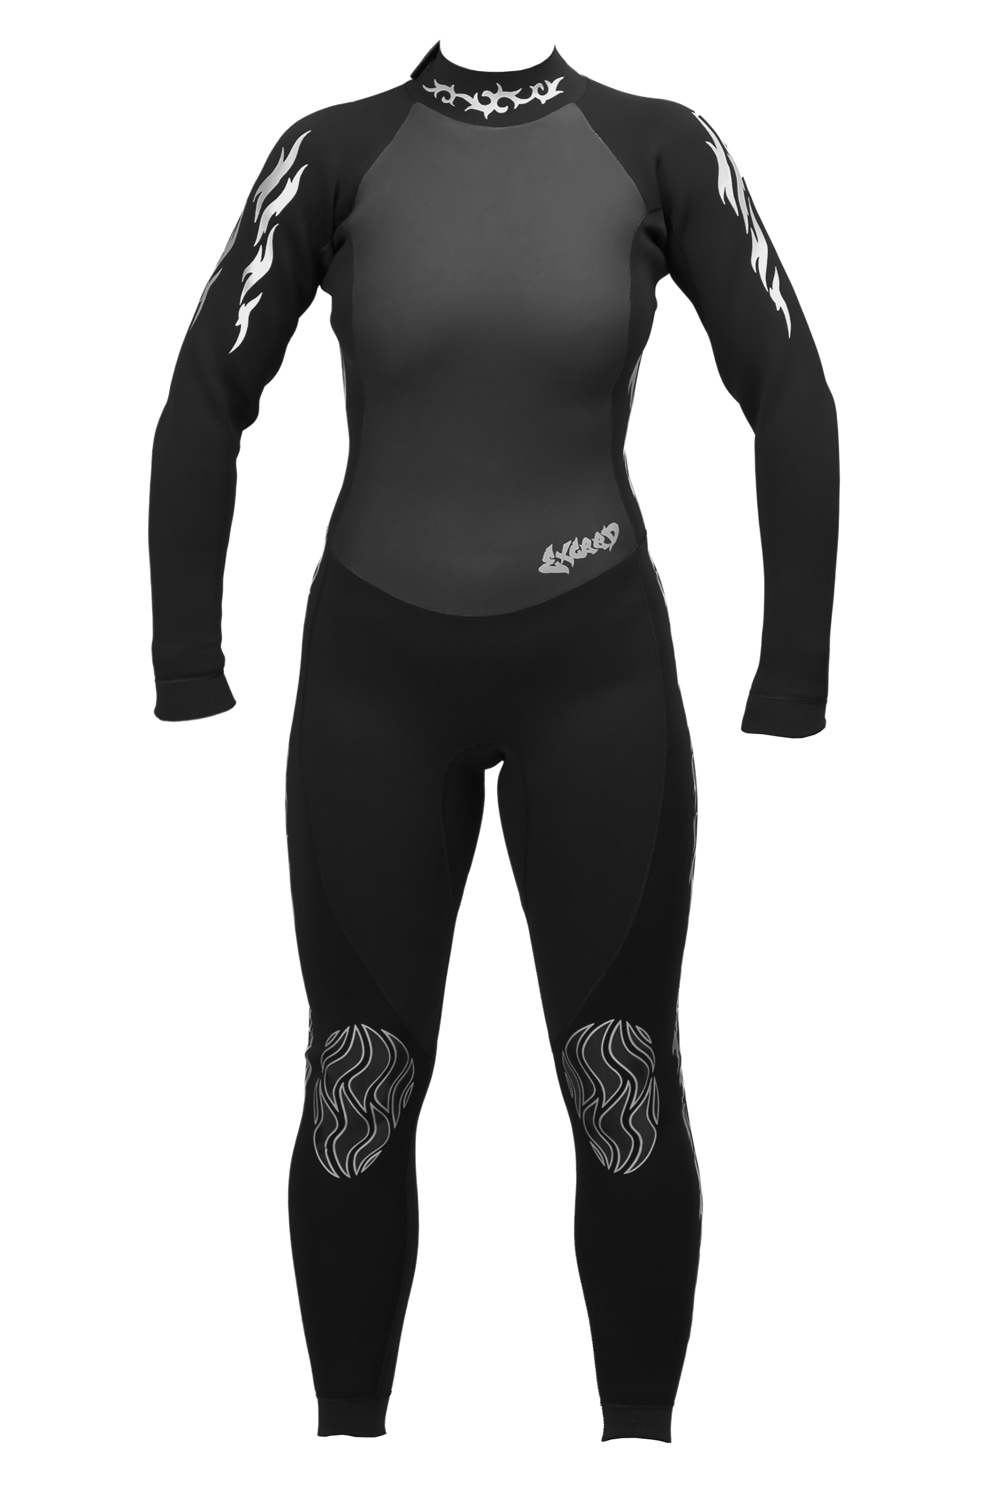 Exceed Empress Black Womens 3/2mm Full Wetsuit